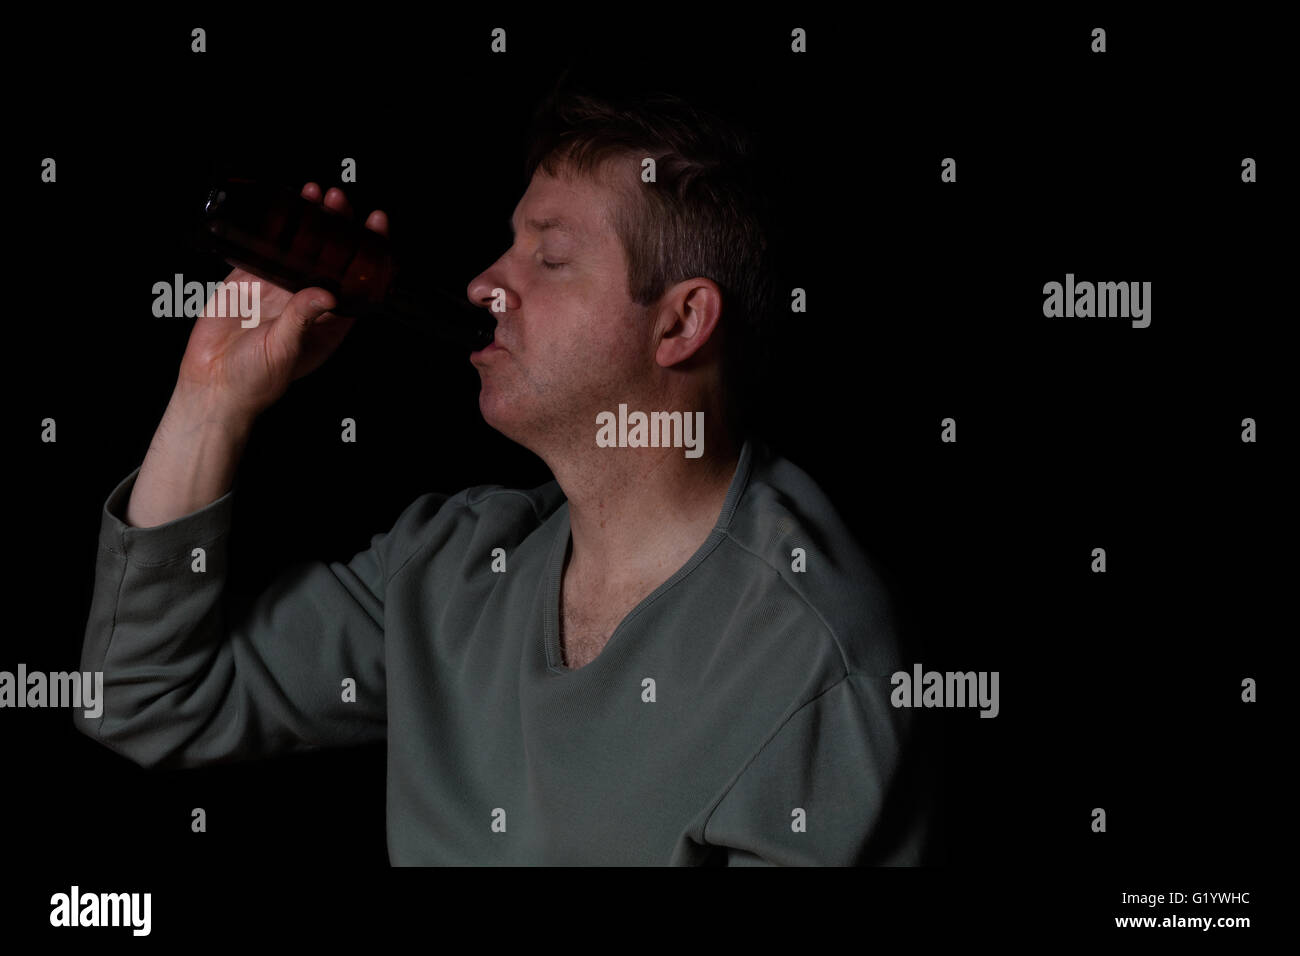 Depressed man drinking beer out of a bottle while sitting down with eyes close in a dark background. Stock Photo